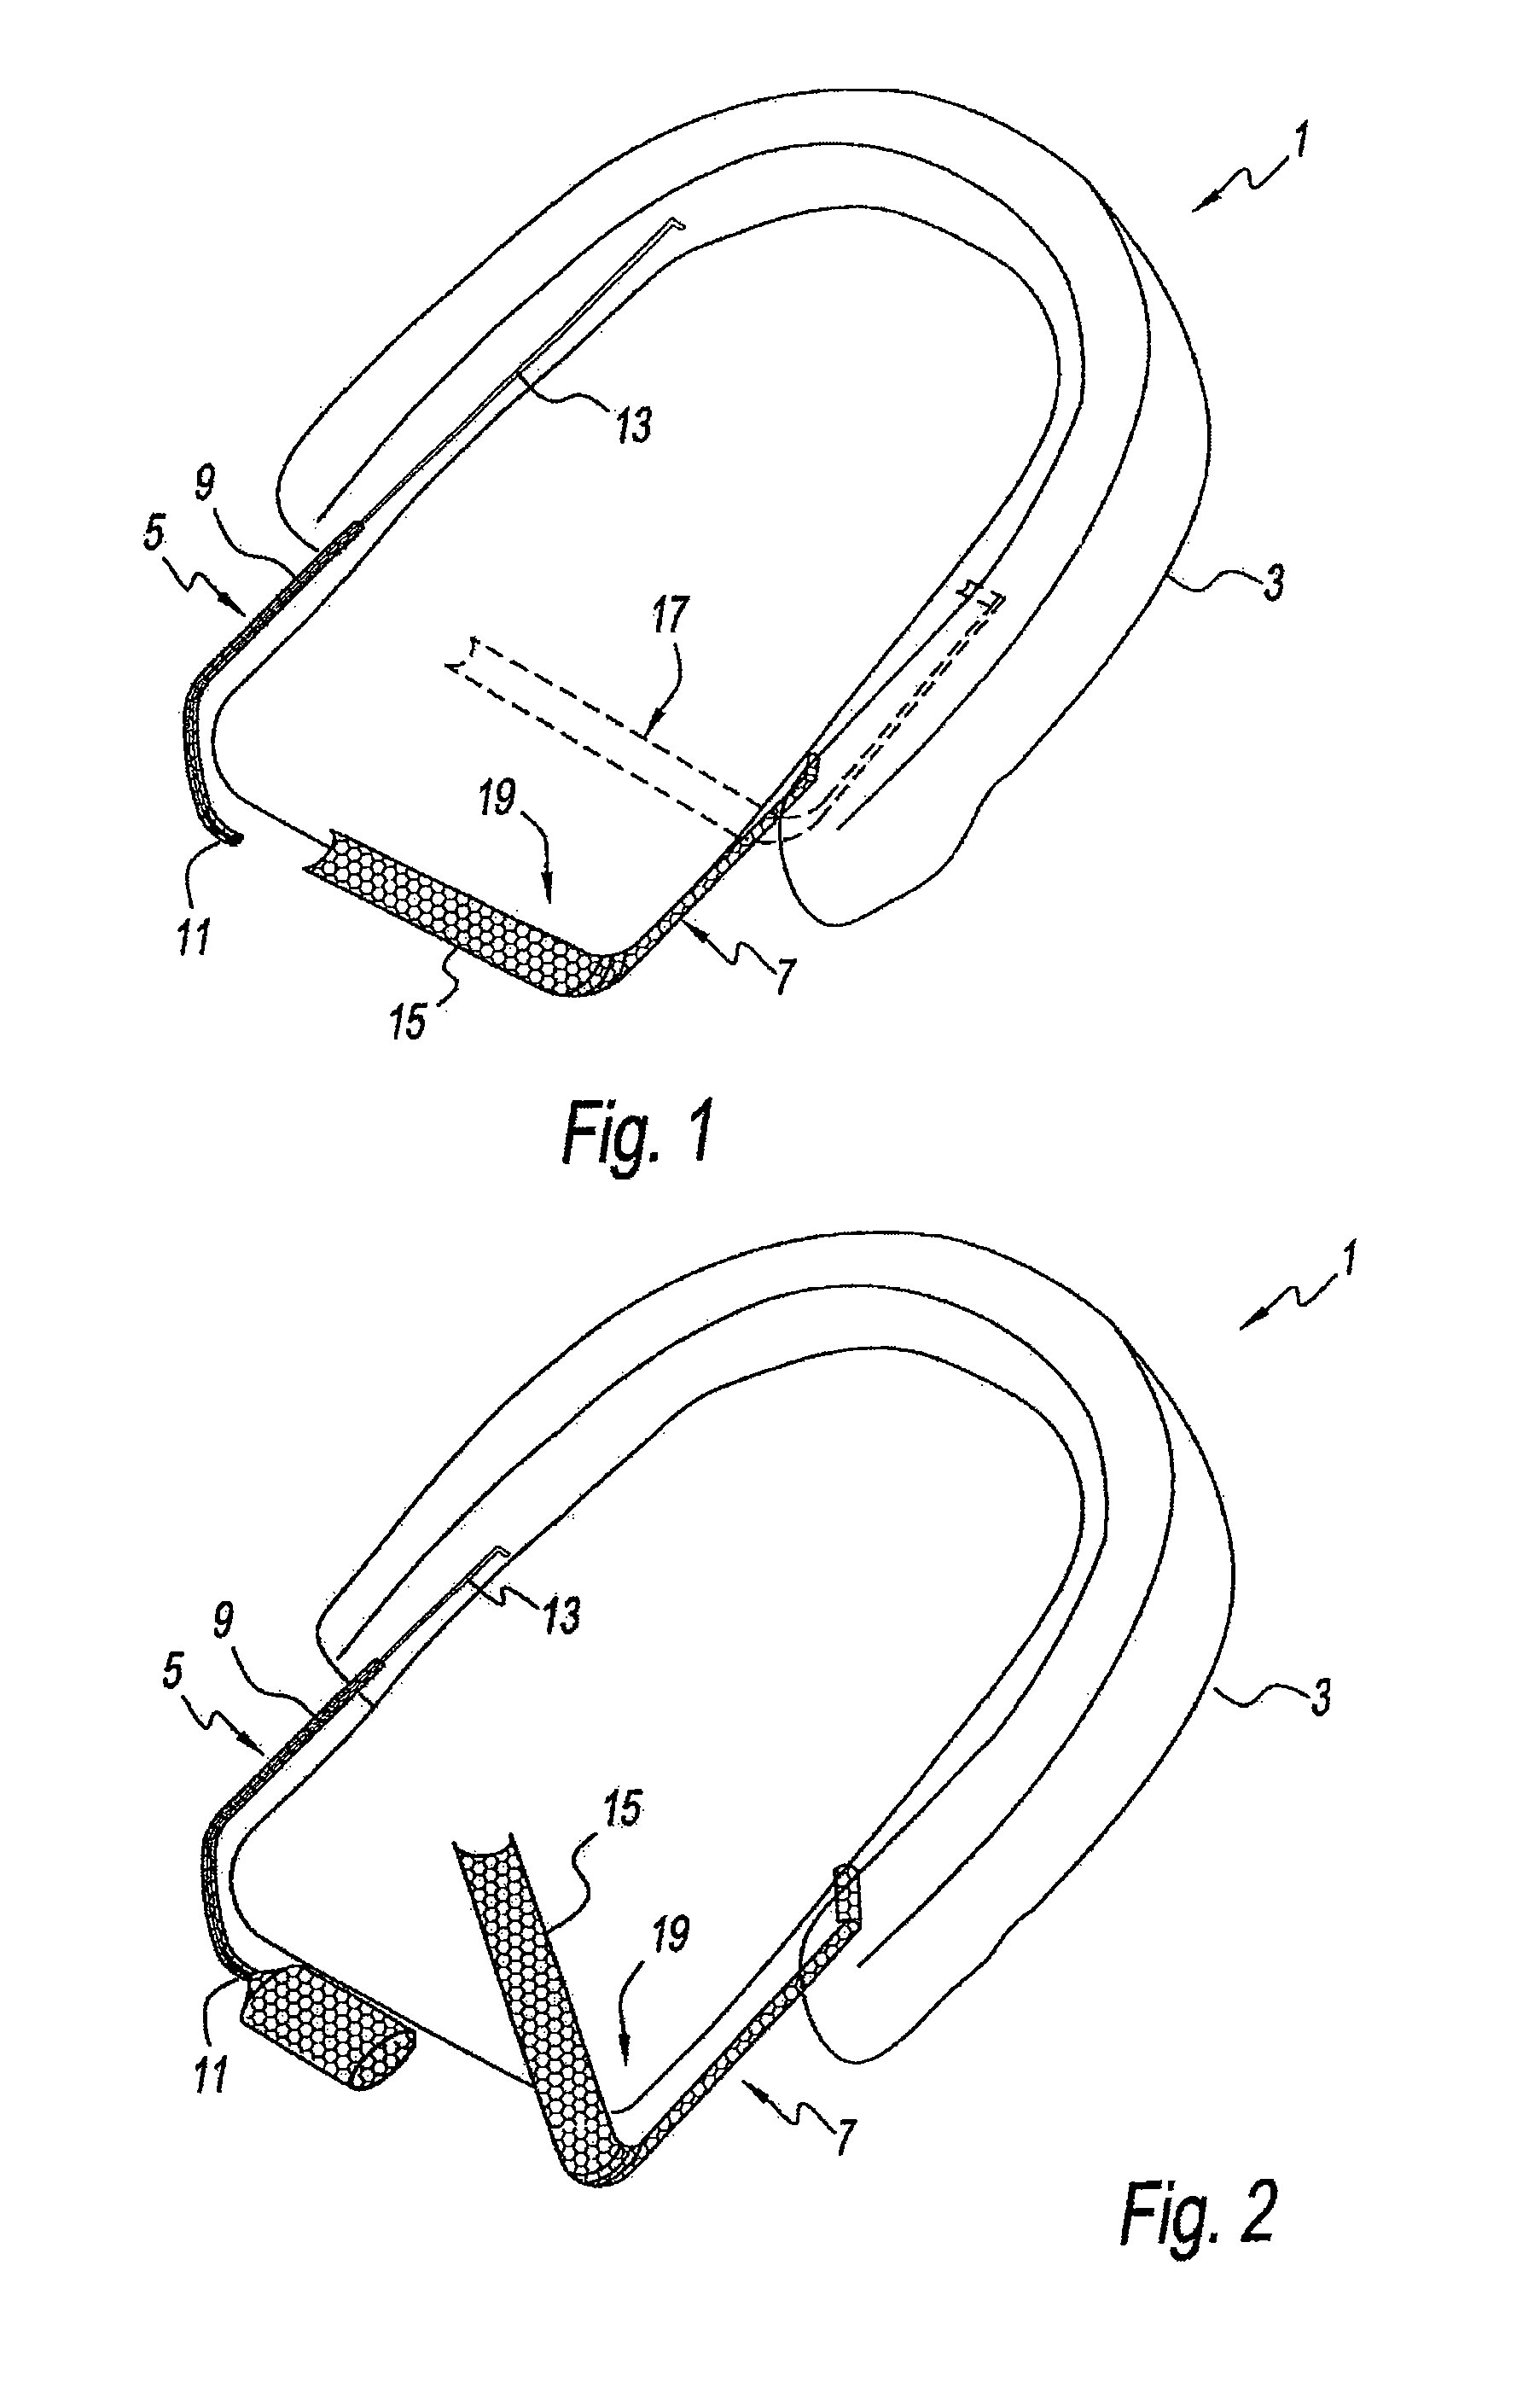 Devices, systems and methods for the treatment of sleep apnea